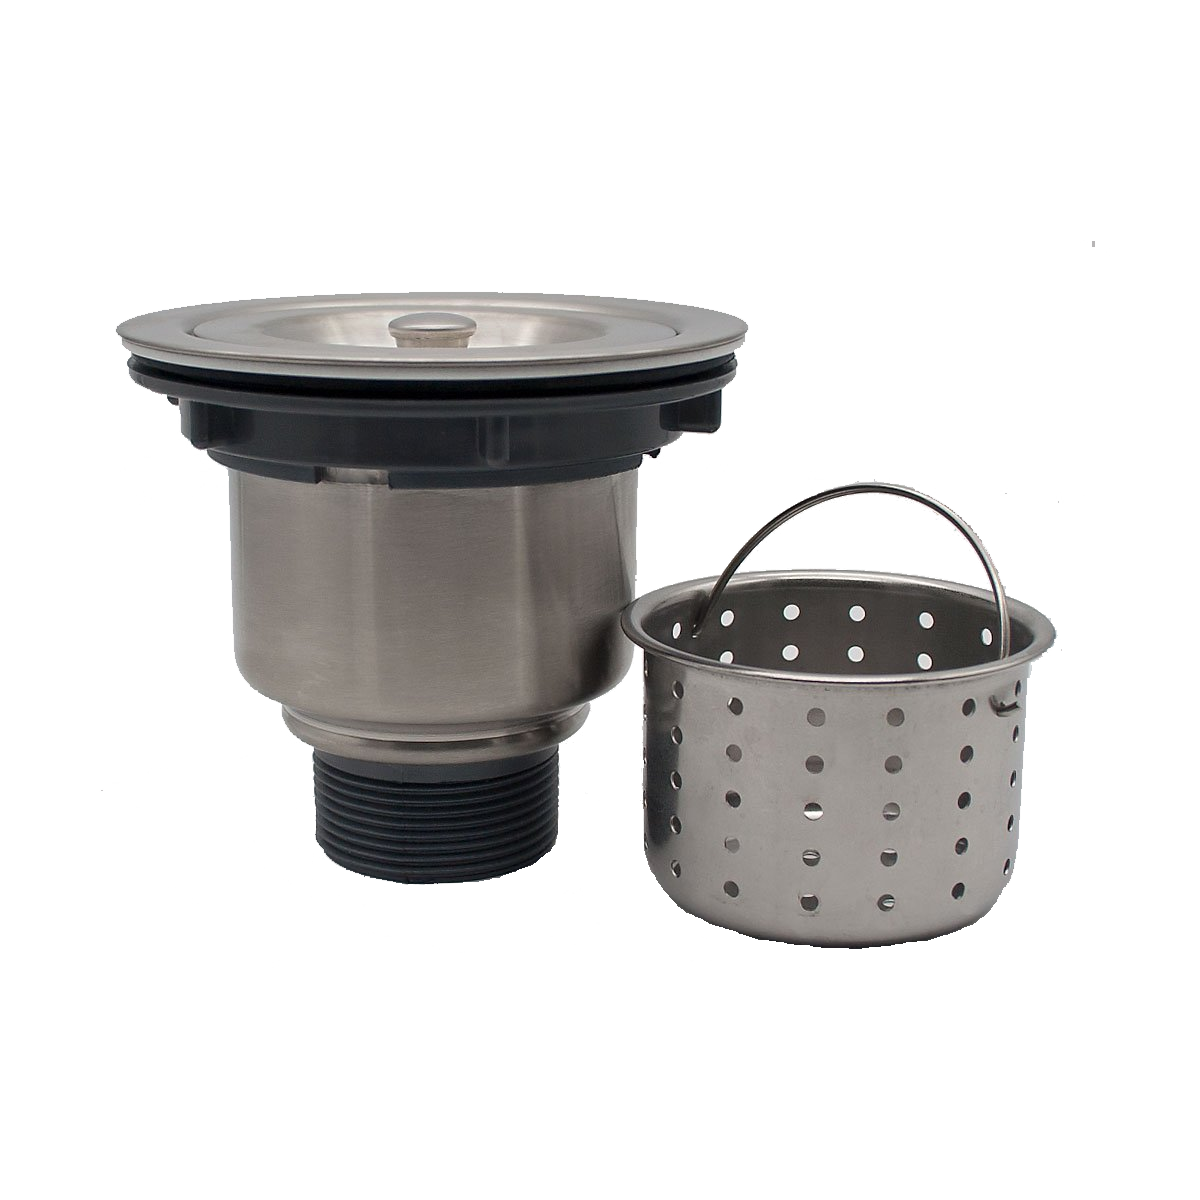 Pelican Int'l Stainless Deluxe Strainer